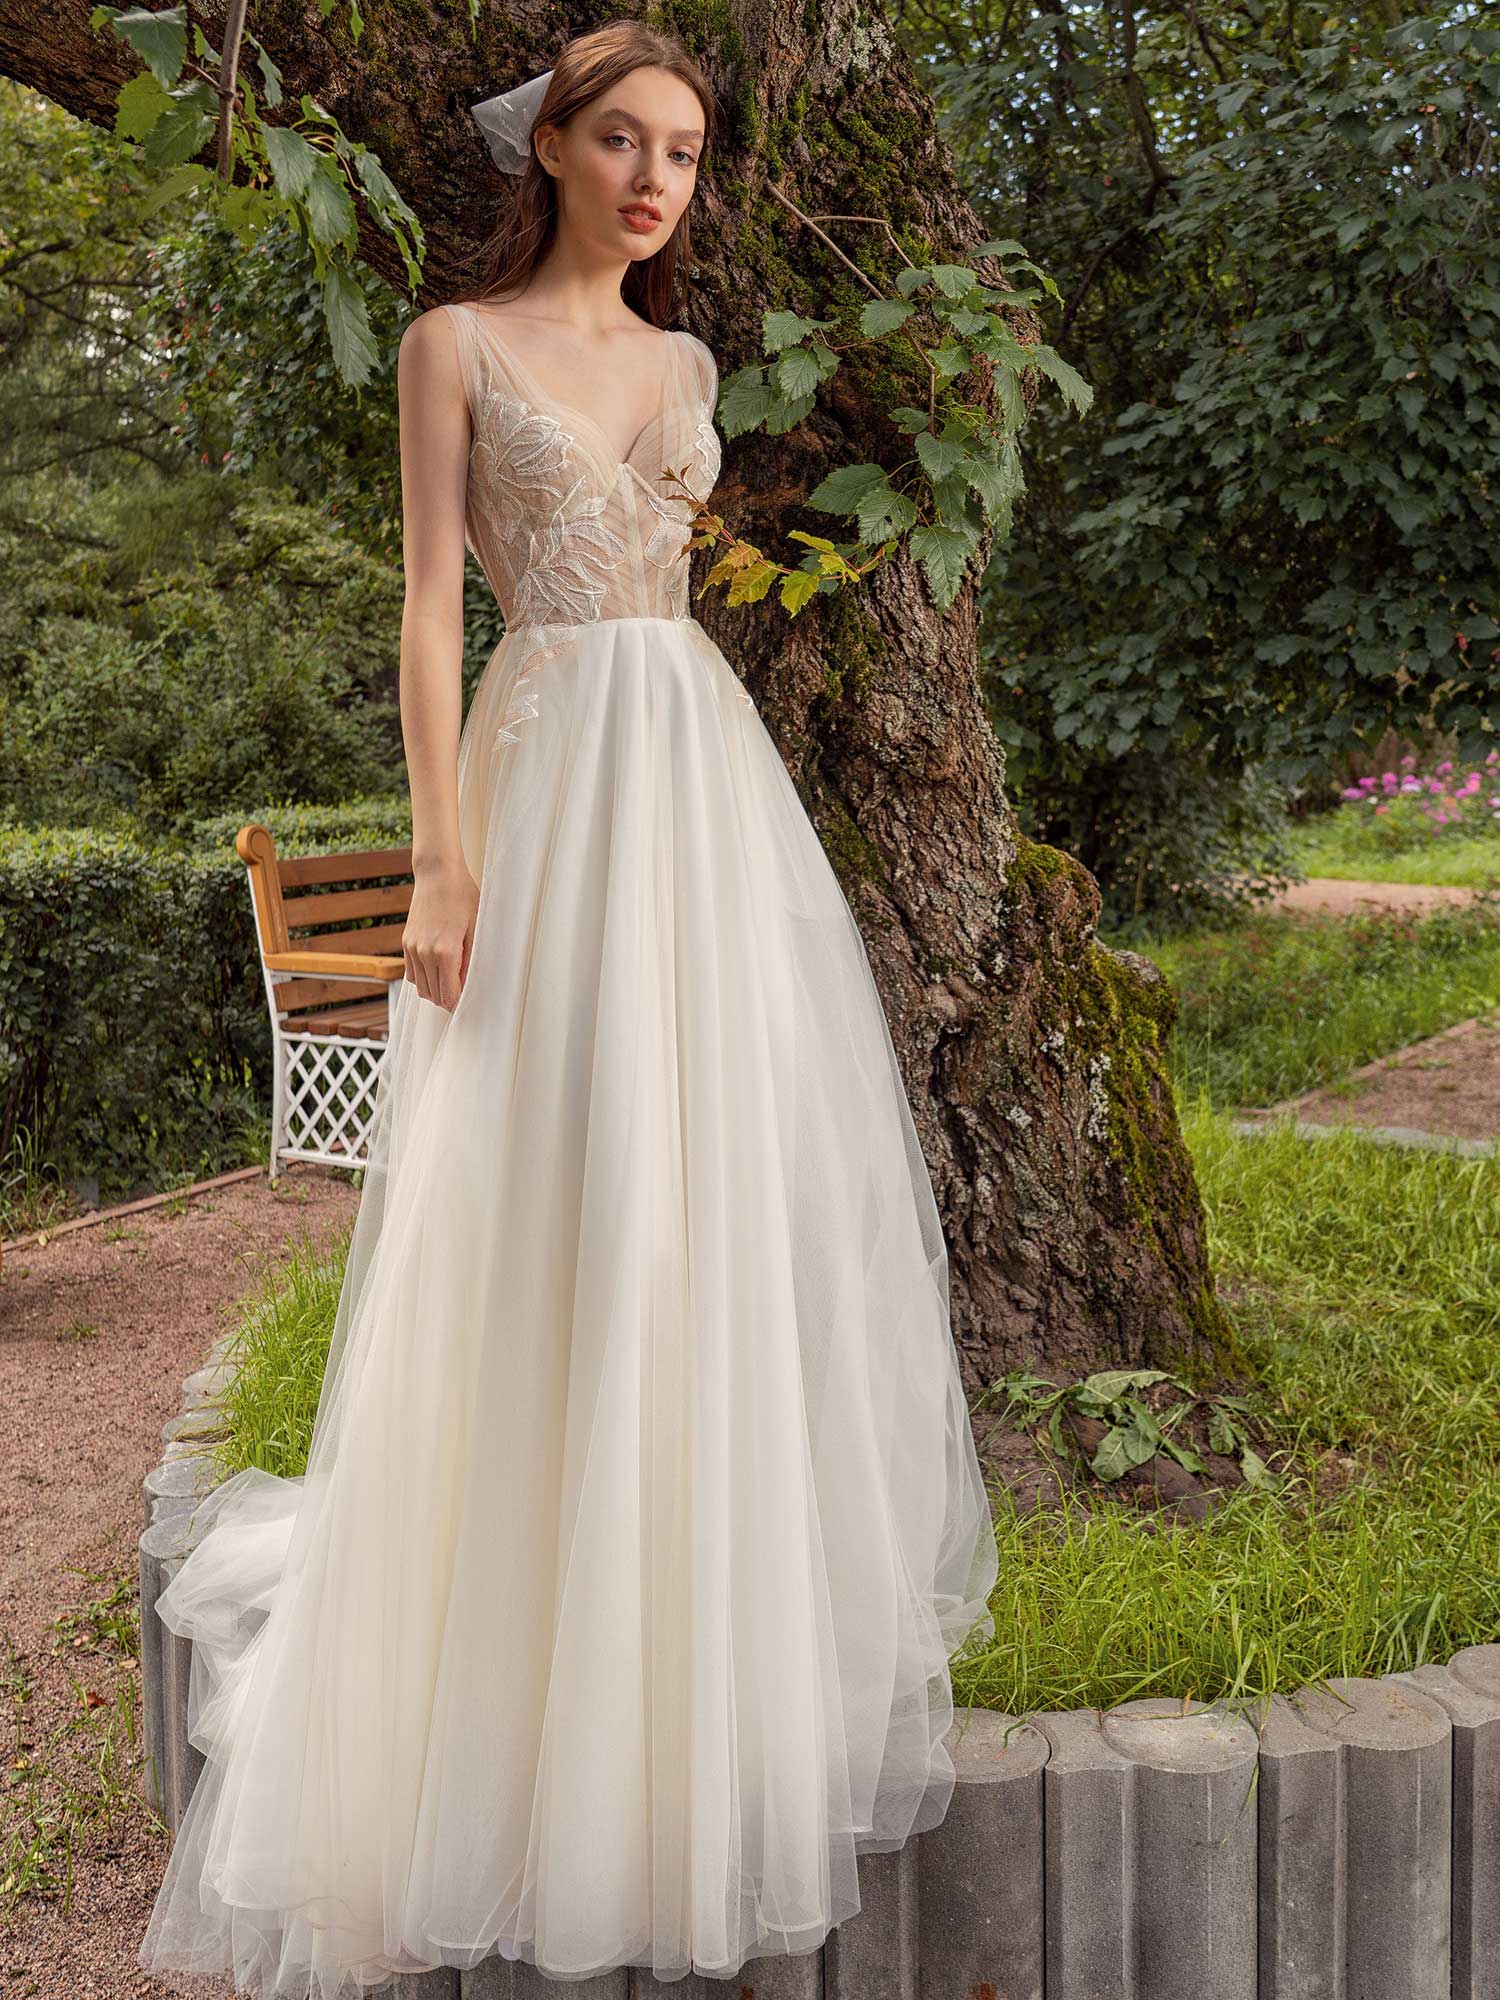 A Line Wedding Dress With Bustier Style Corset Floral Decor And Pockets Ubicaciondepersonas 3972